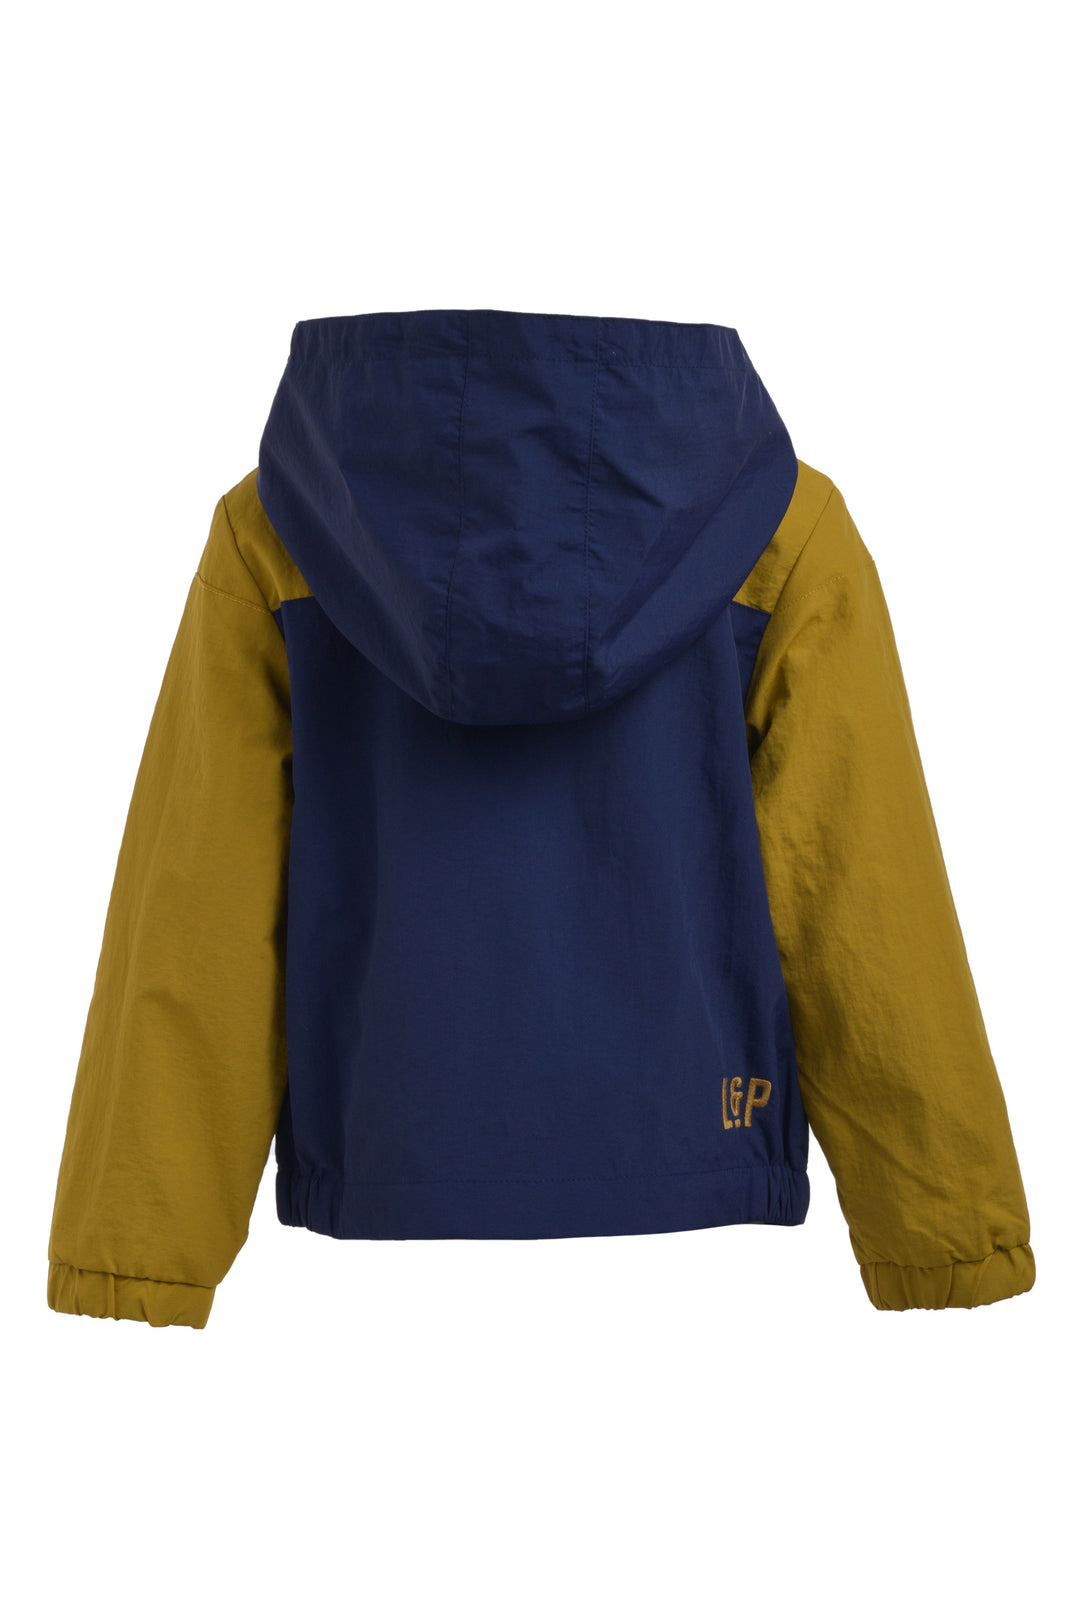 Cotton Lined Outdoor Coat [Baby]